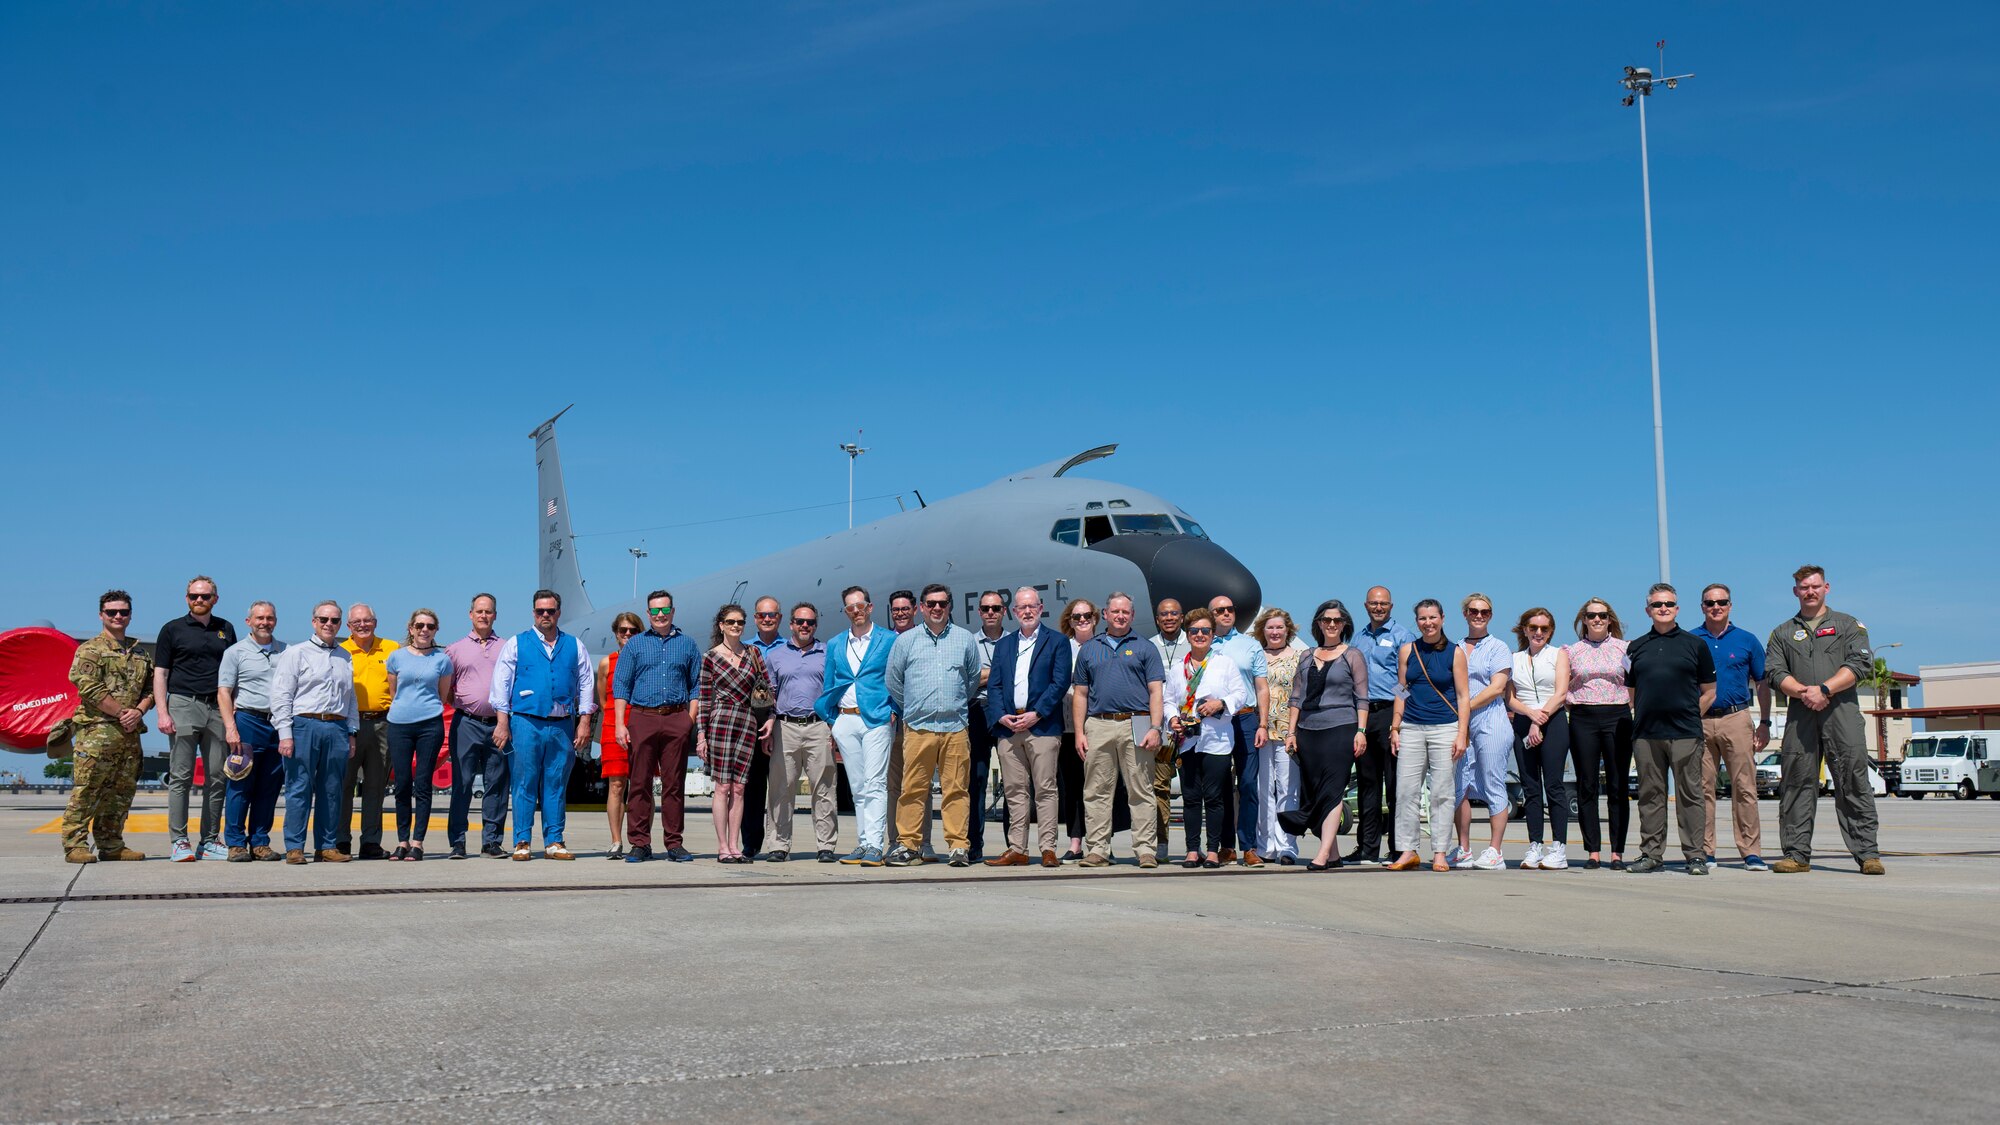 A group of civic leaders from the Nashville Chamber of Commerce pose with service members assigned to the 50th Air Refueling Squadron for a photo near a KC-135 Stratotanker at MacDill Air Force Base, Florida, May 4, 2023. The group toured the base to gain a better understanding of military operations and the best ways to support service members in their local community. (U.S. Air Force photo by Senior Airman Lauren Cobin)